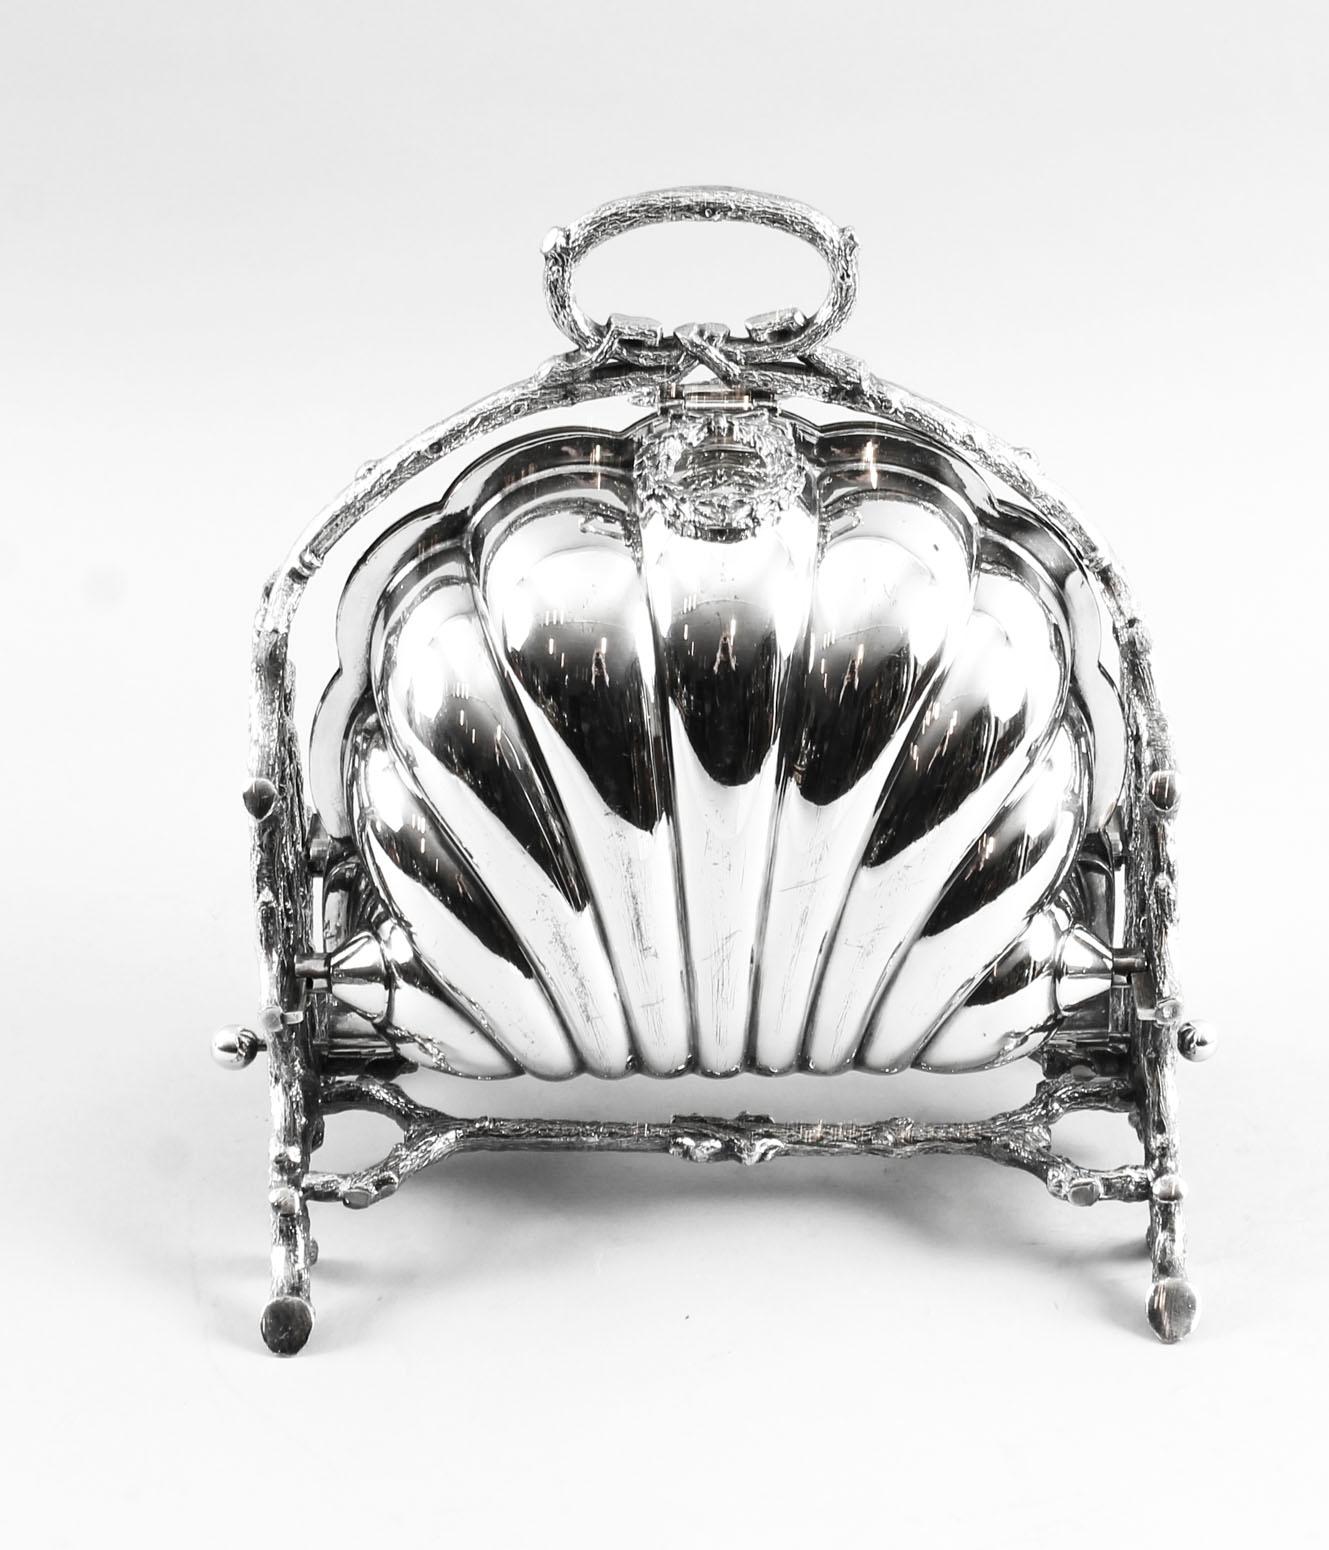 This is a highly decorative antique Victorian silver plated folding biscuit box, the base bearing the makers' mark of the renowned silversmiths Walker and Hall of Sheffield, England, circa 1880 in date and bearing the registration number 36762.